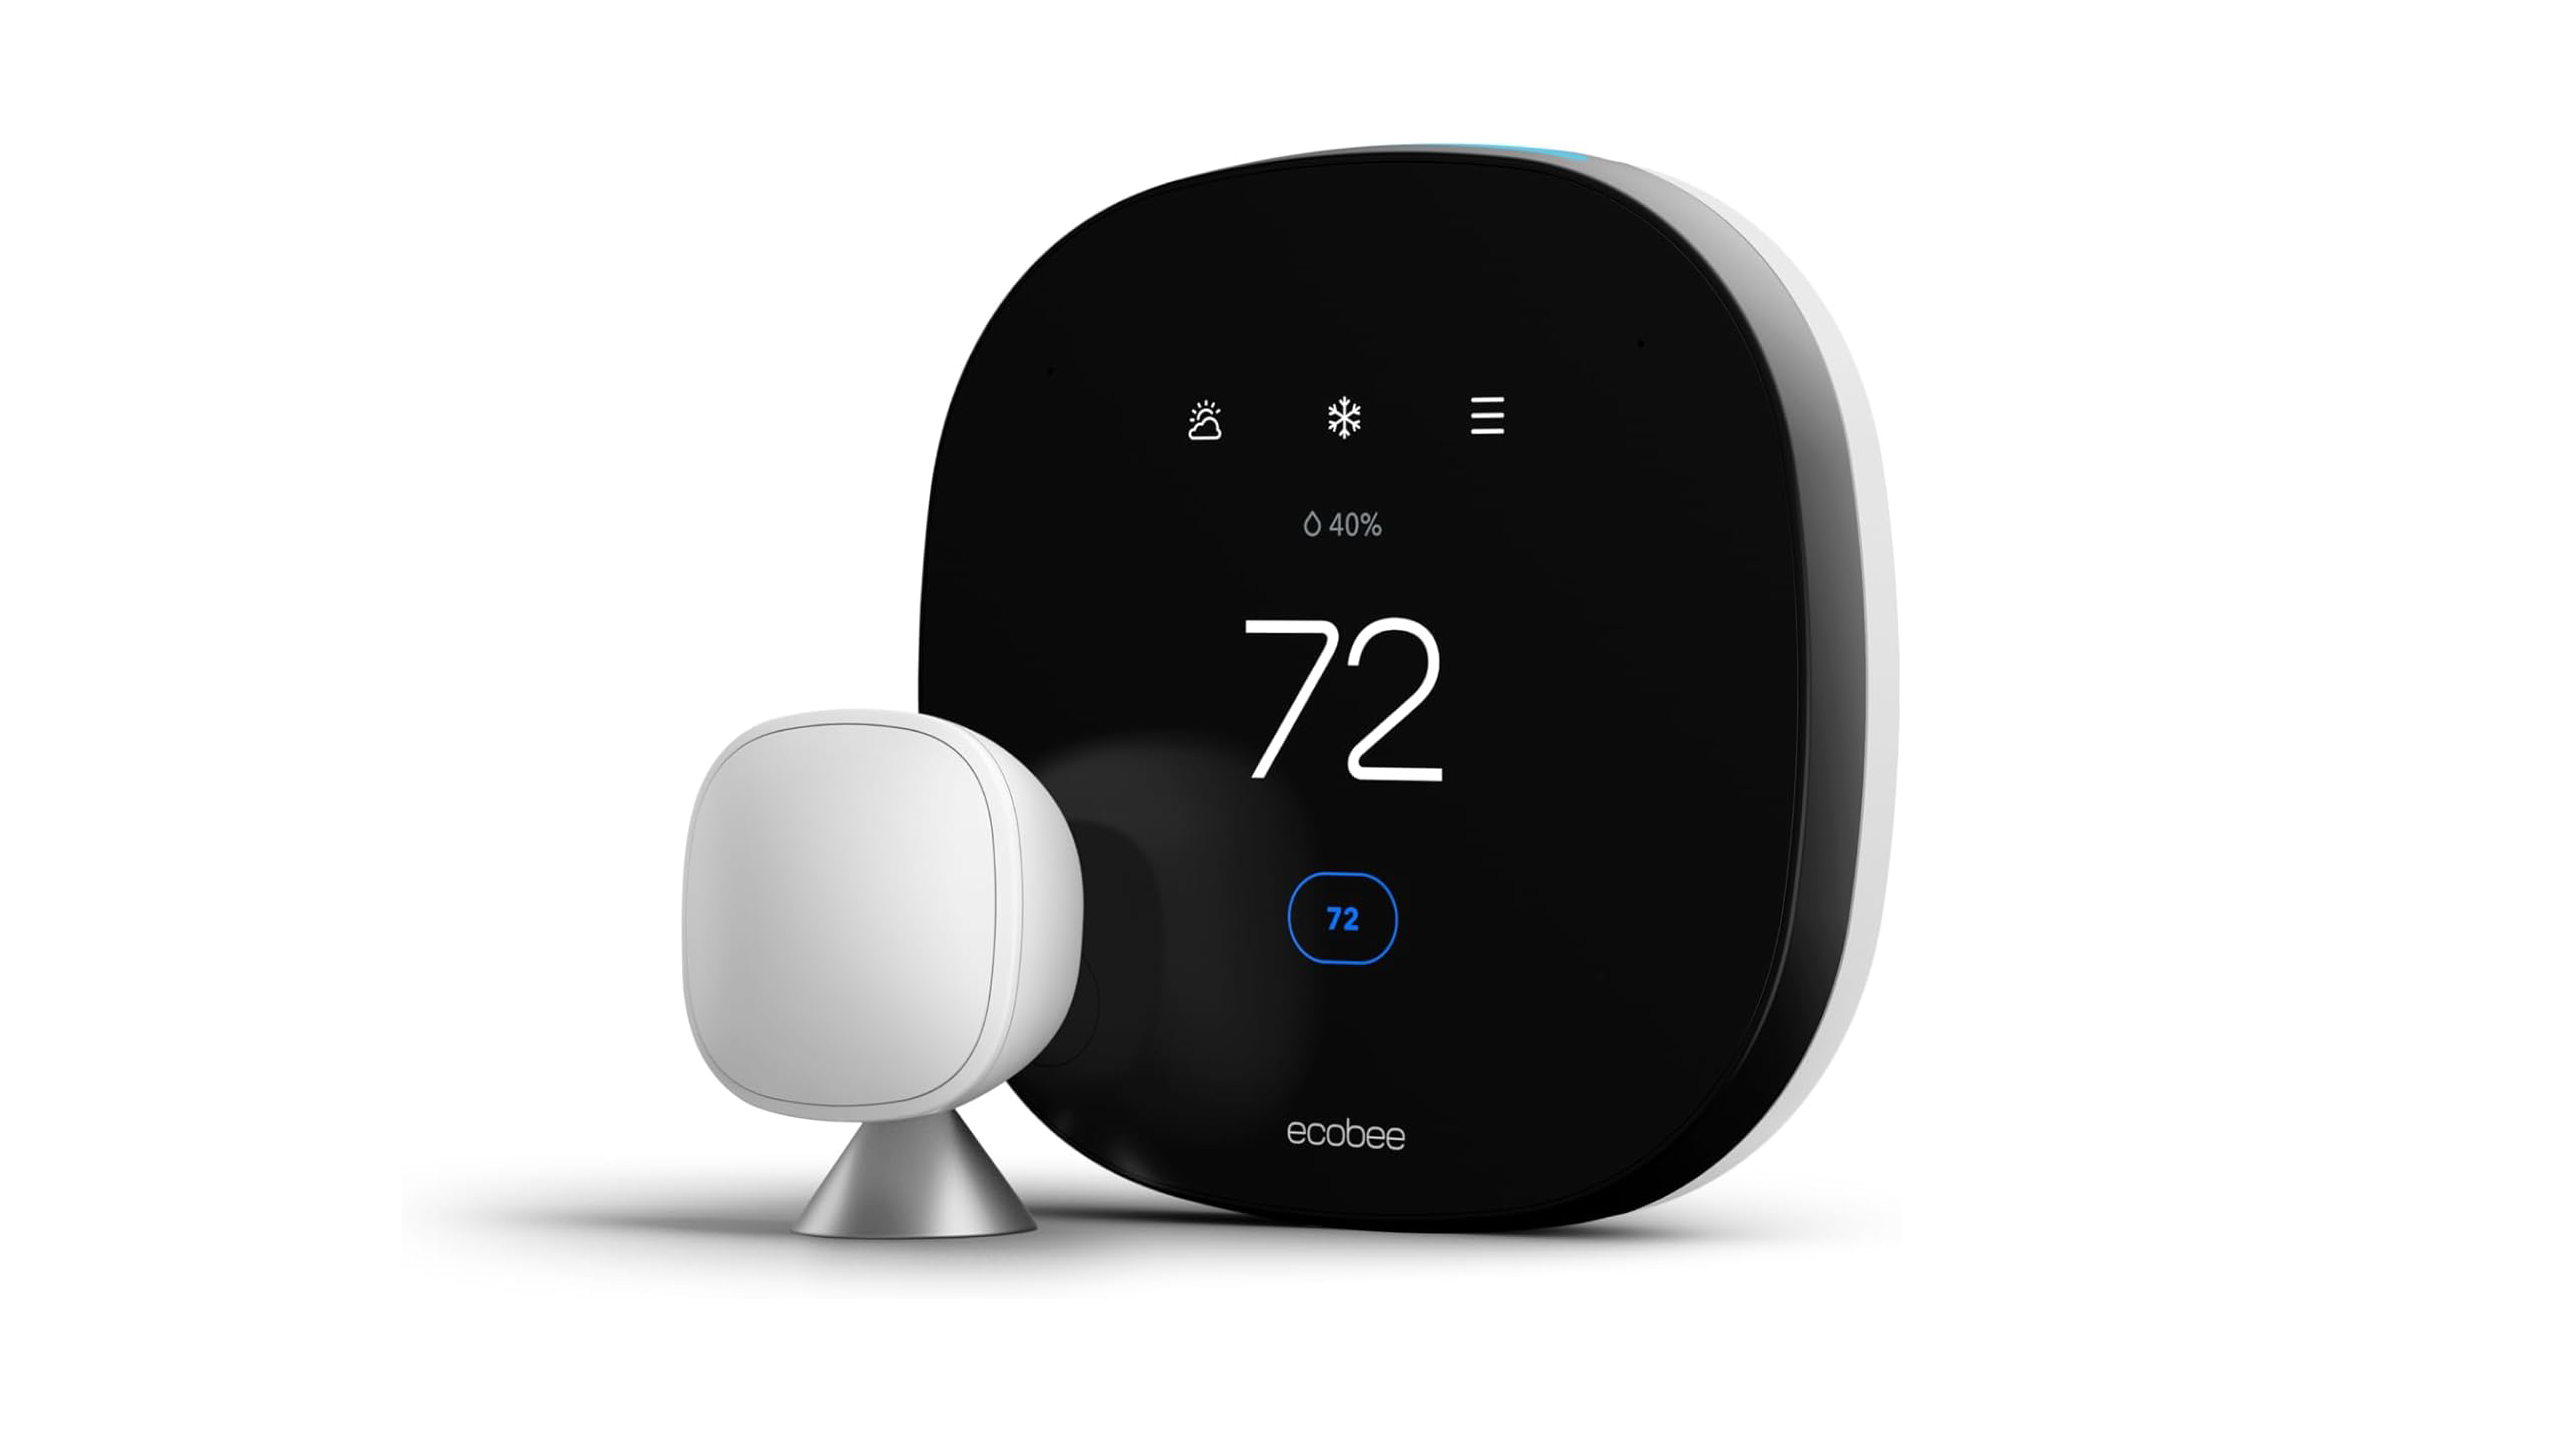 An Ecobee Smart Thermostat with voice control.